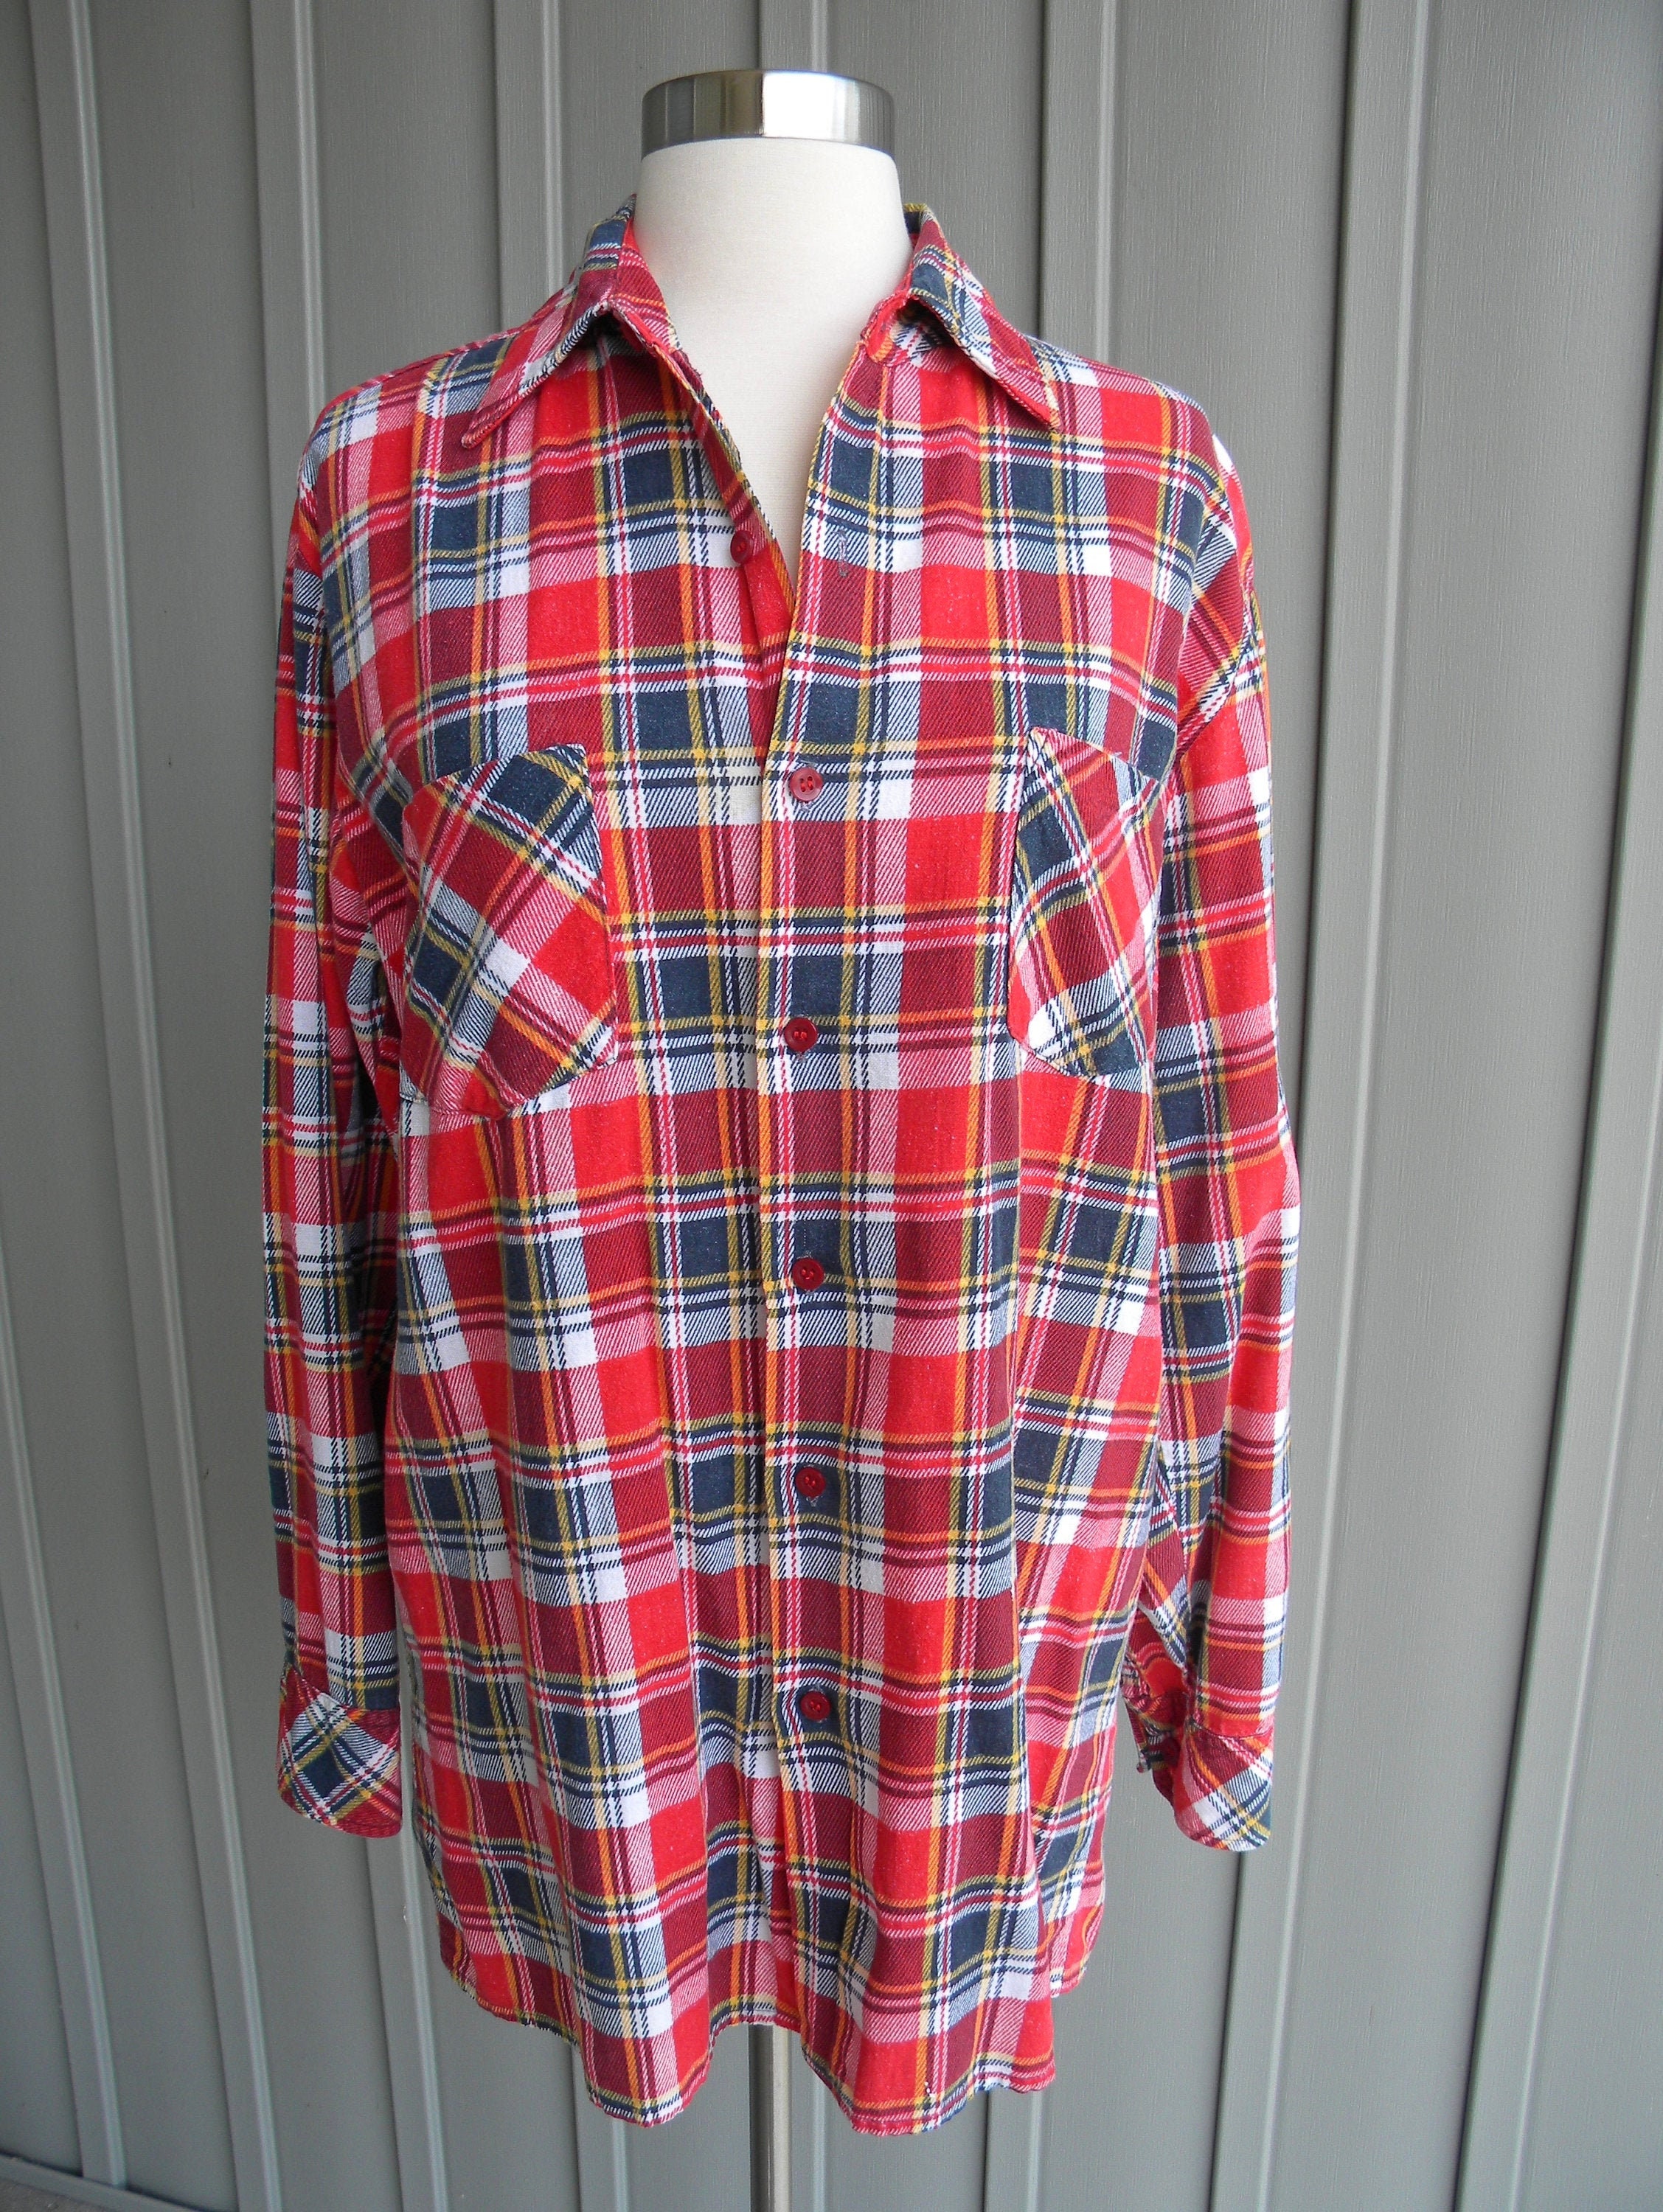 Unisex Lightweight Vintage Red Plaid Flannel Shirt / by Kingsport